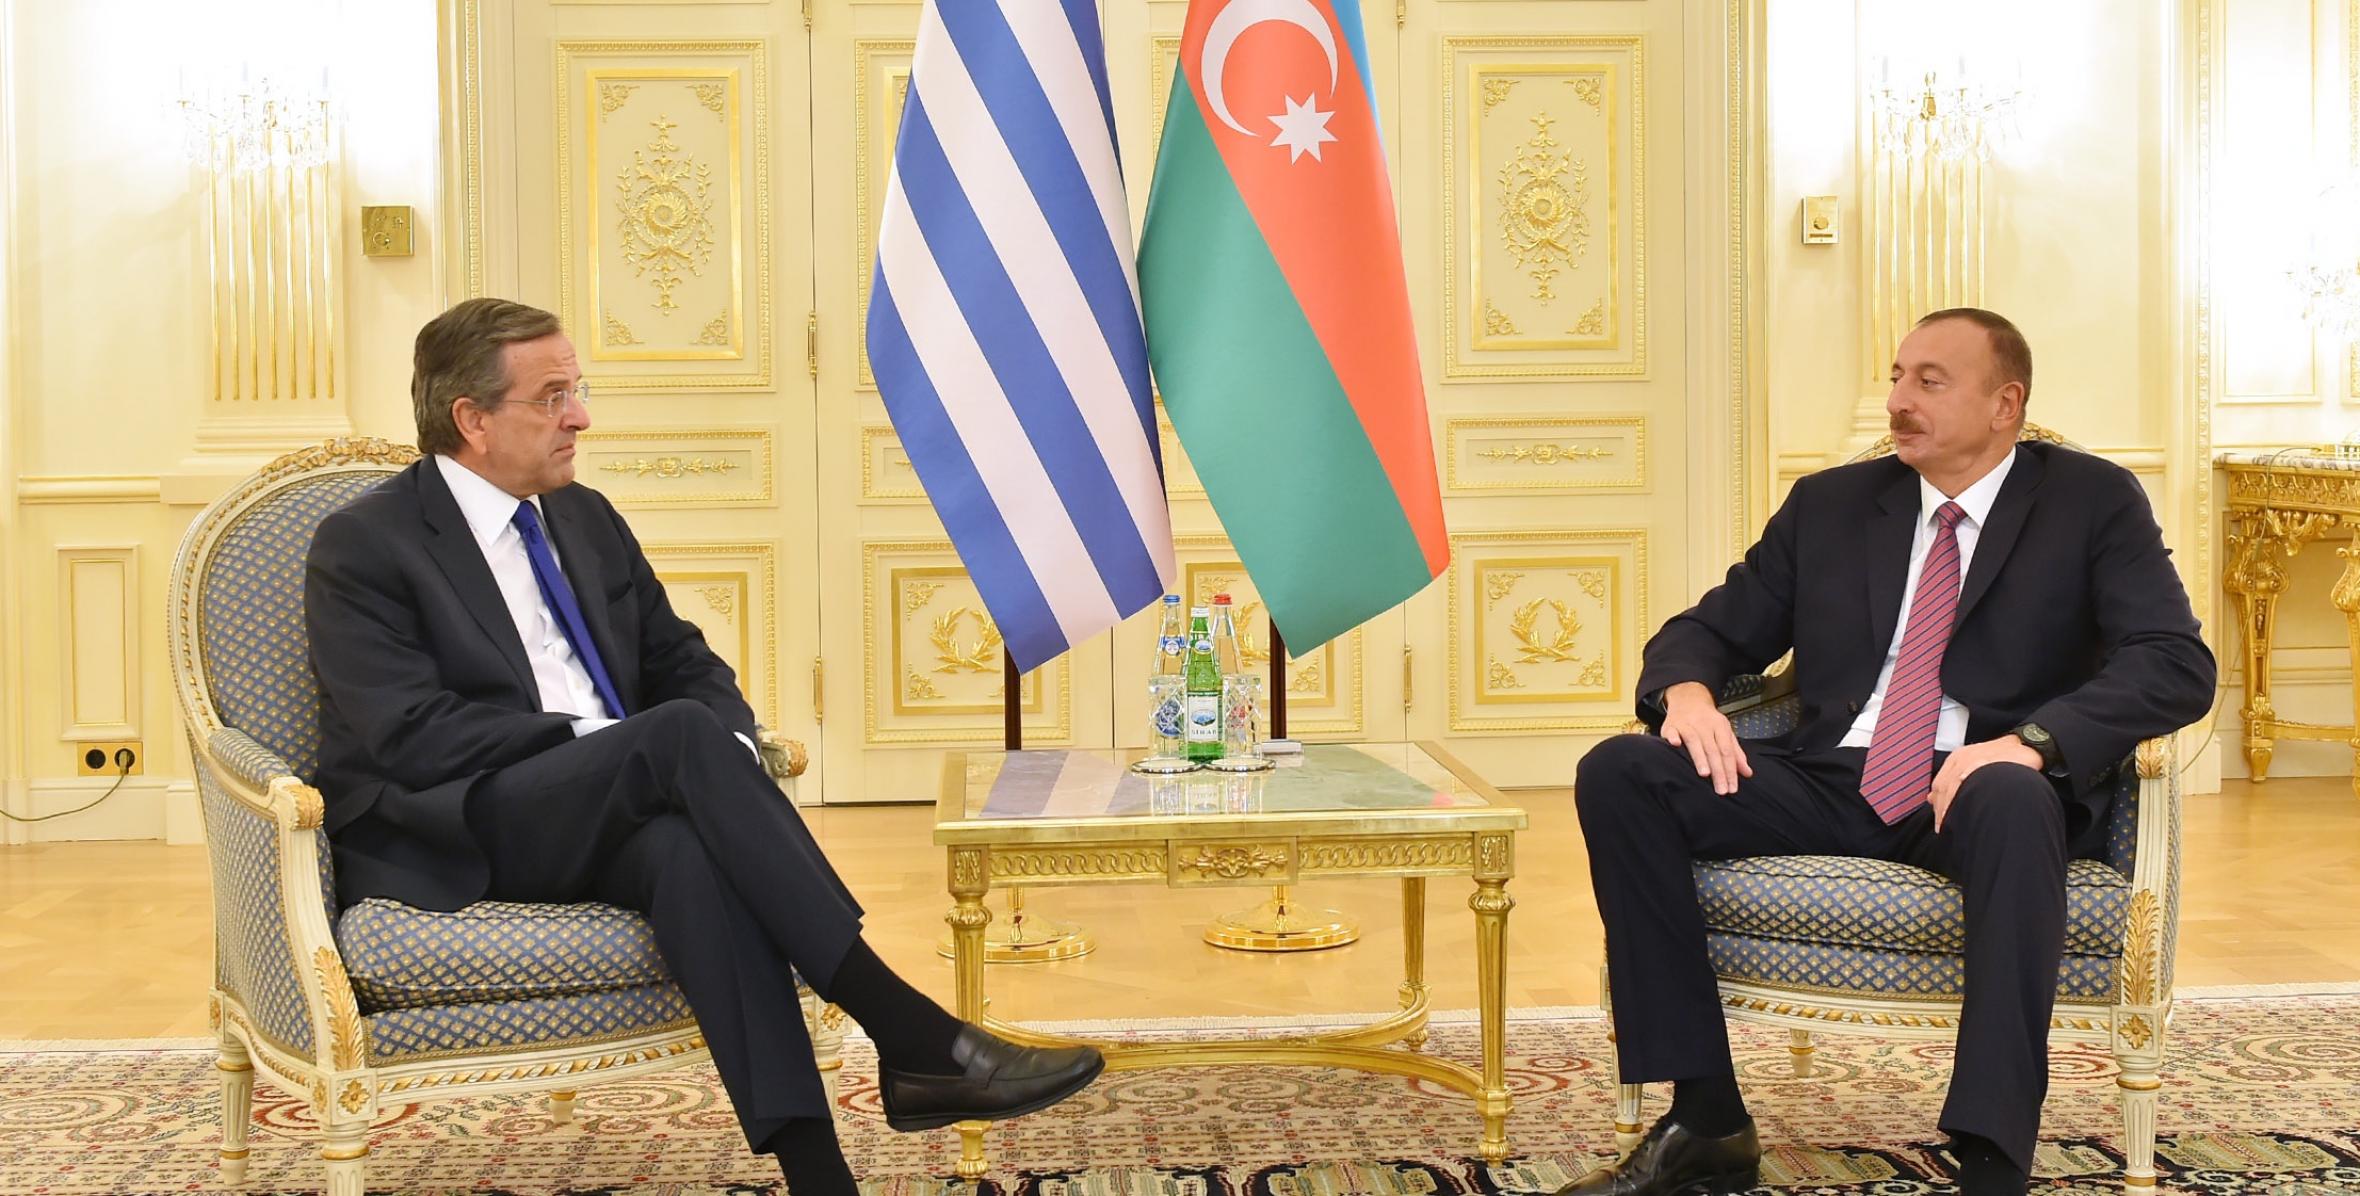 Ilham Aliyev and Prime Minister of Greece Antonis Samaras held a one-on-one meeting